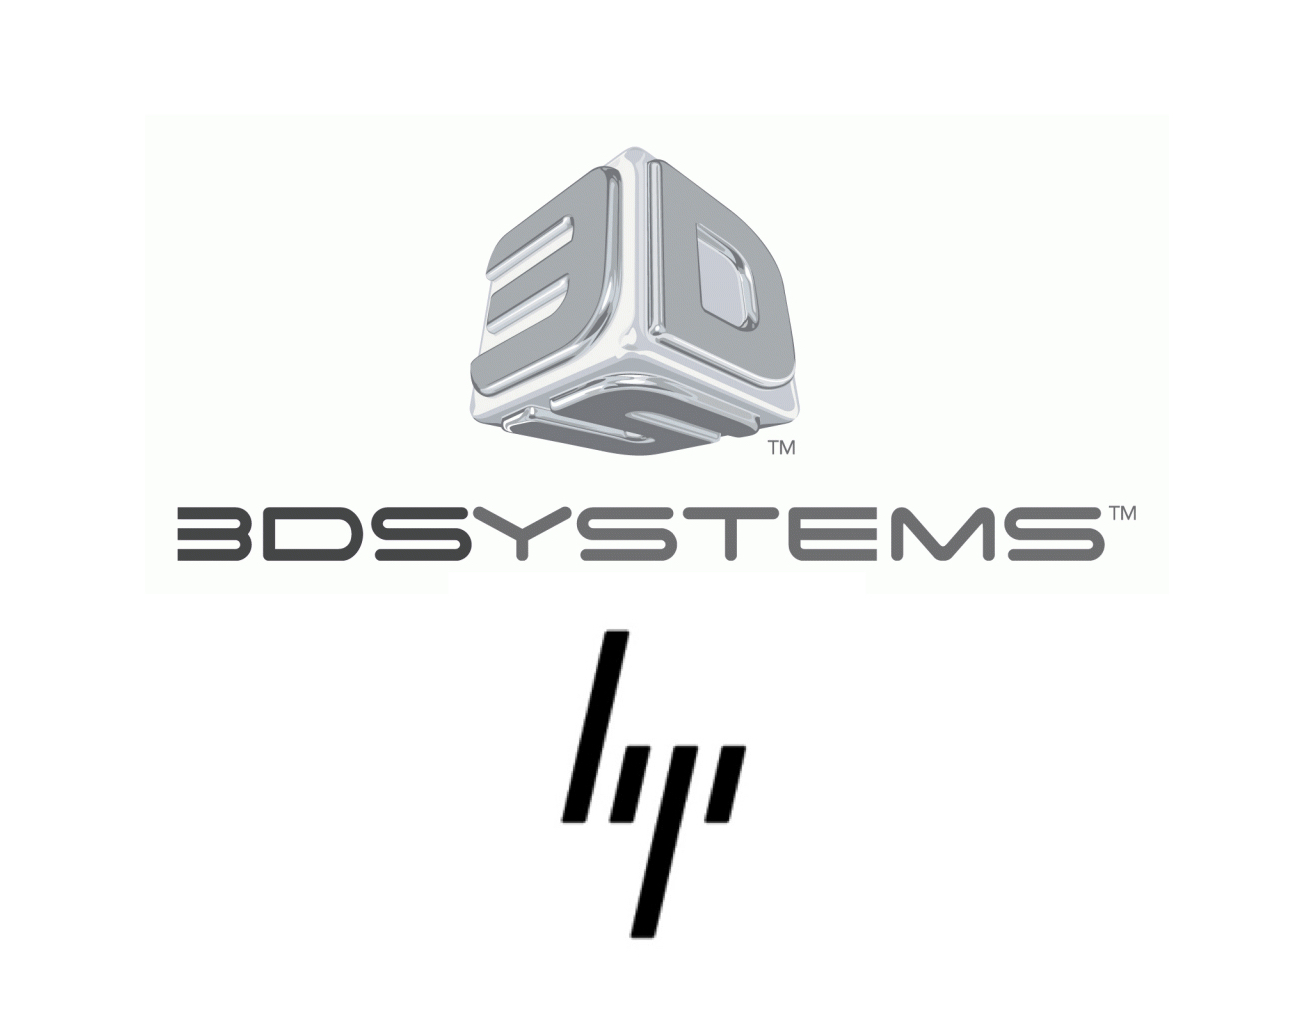  HP and 3D Systems logos 